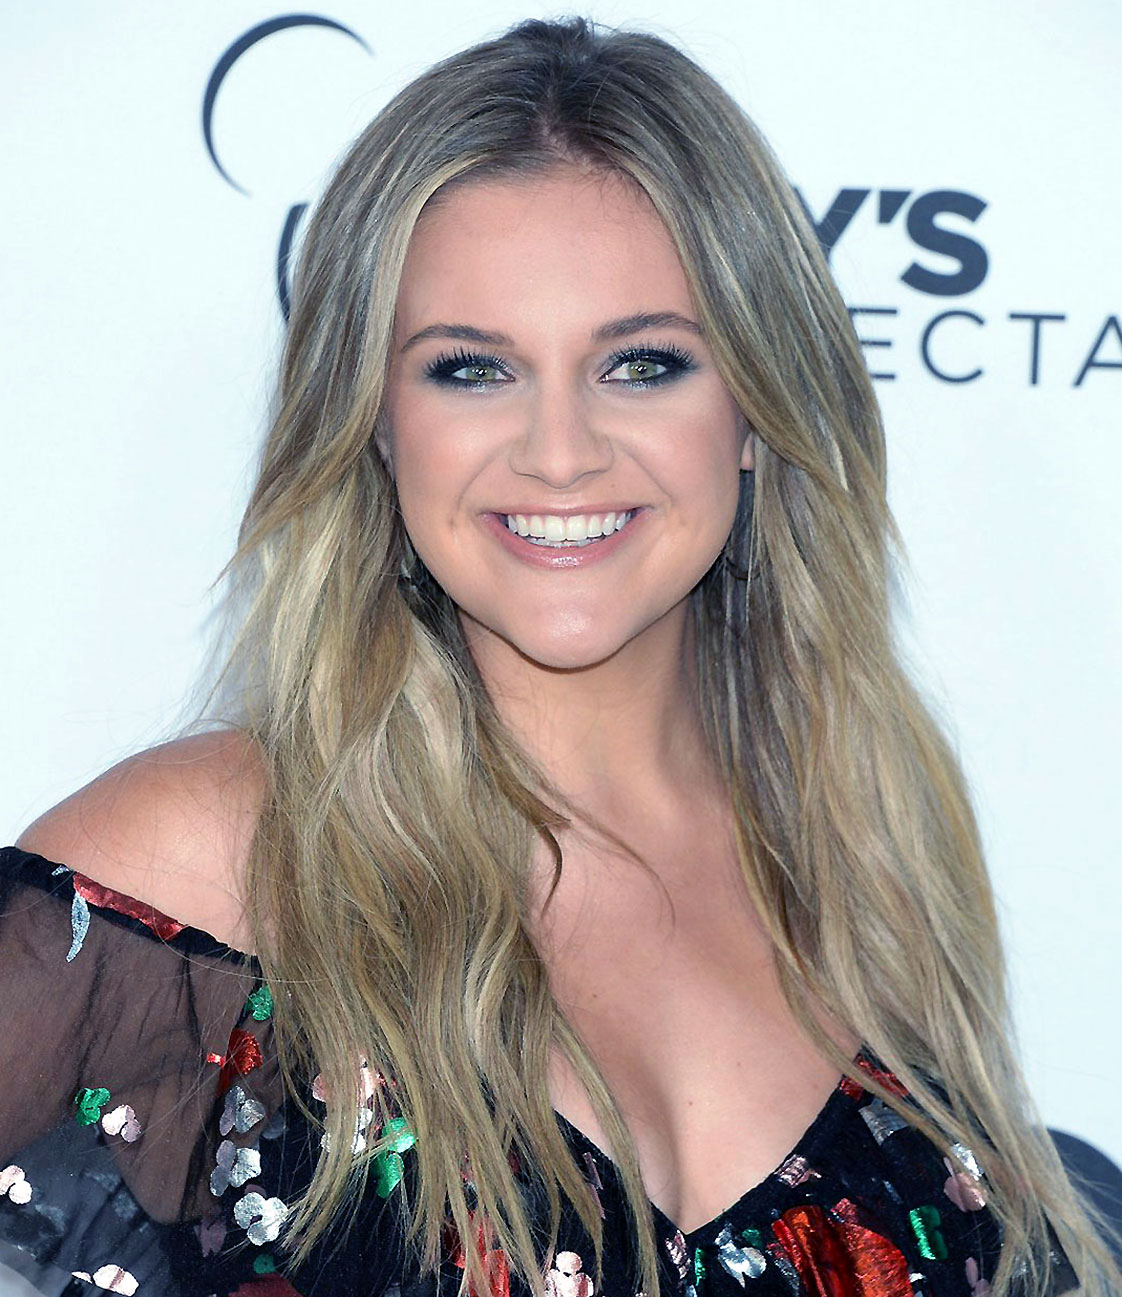 Kelsea Ballerini nude naked sexy topless cleavage boobs butt130